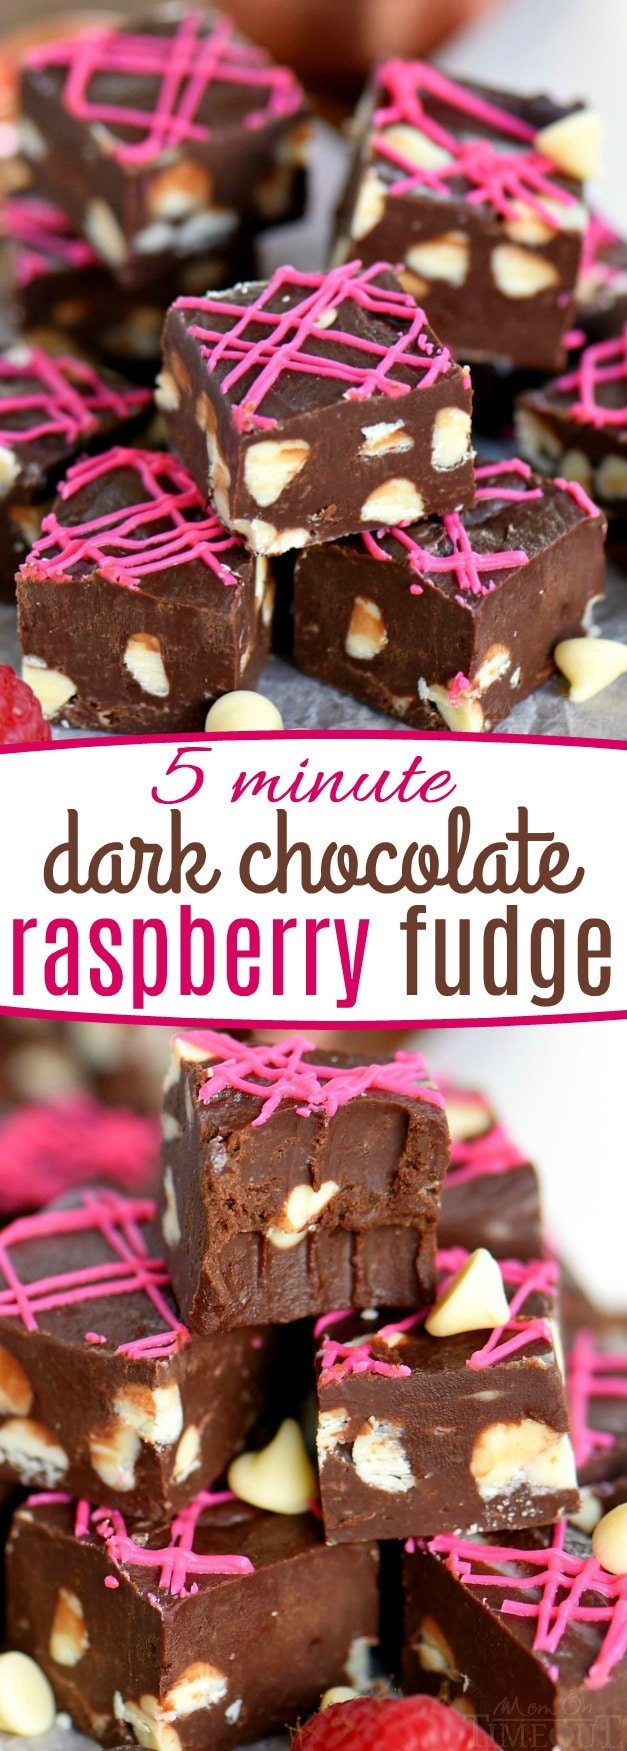 Fudge doesn’t get better than this Dark Chocolate Raspberry Fudge. It’s the perfect quick treat for any occasion! Incredibly decadent and gorgeous to boot this easy fudge recipe takes just 5 minutes to make! That can be our little secret… // Mom On Timeout #fudge #raspberry #easy #sweetenedcondensedmilk #dark #chocolate #valentinesday #valentines #christmas #candy